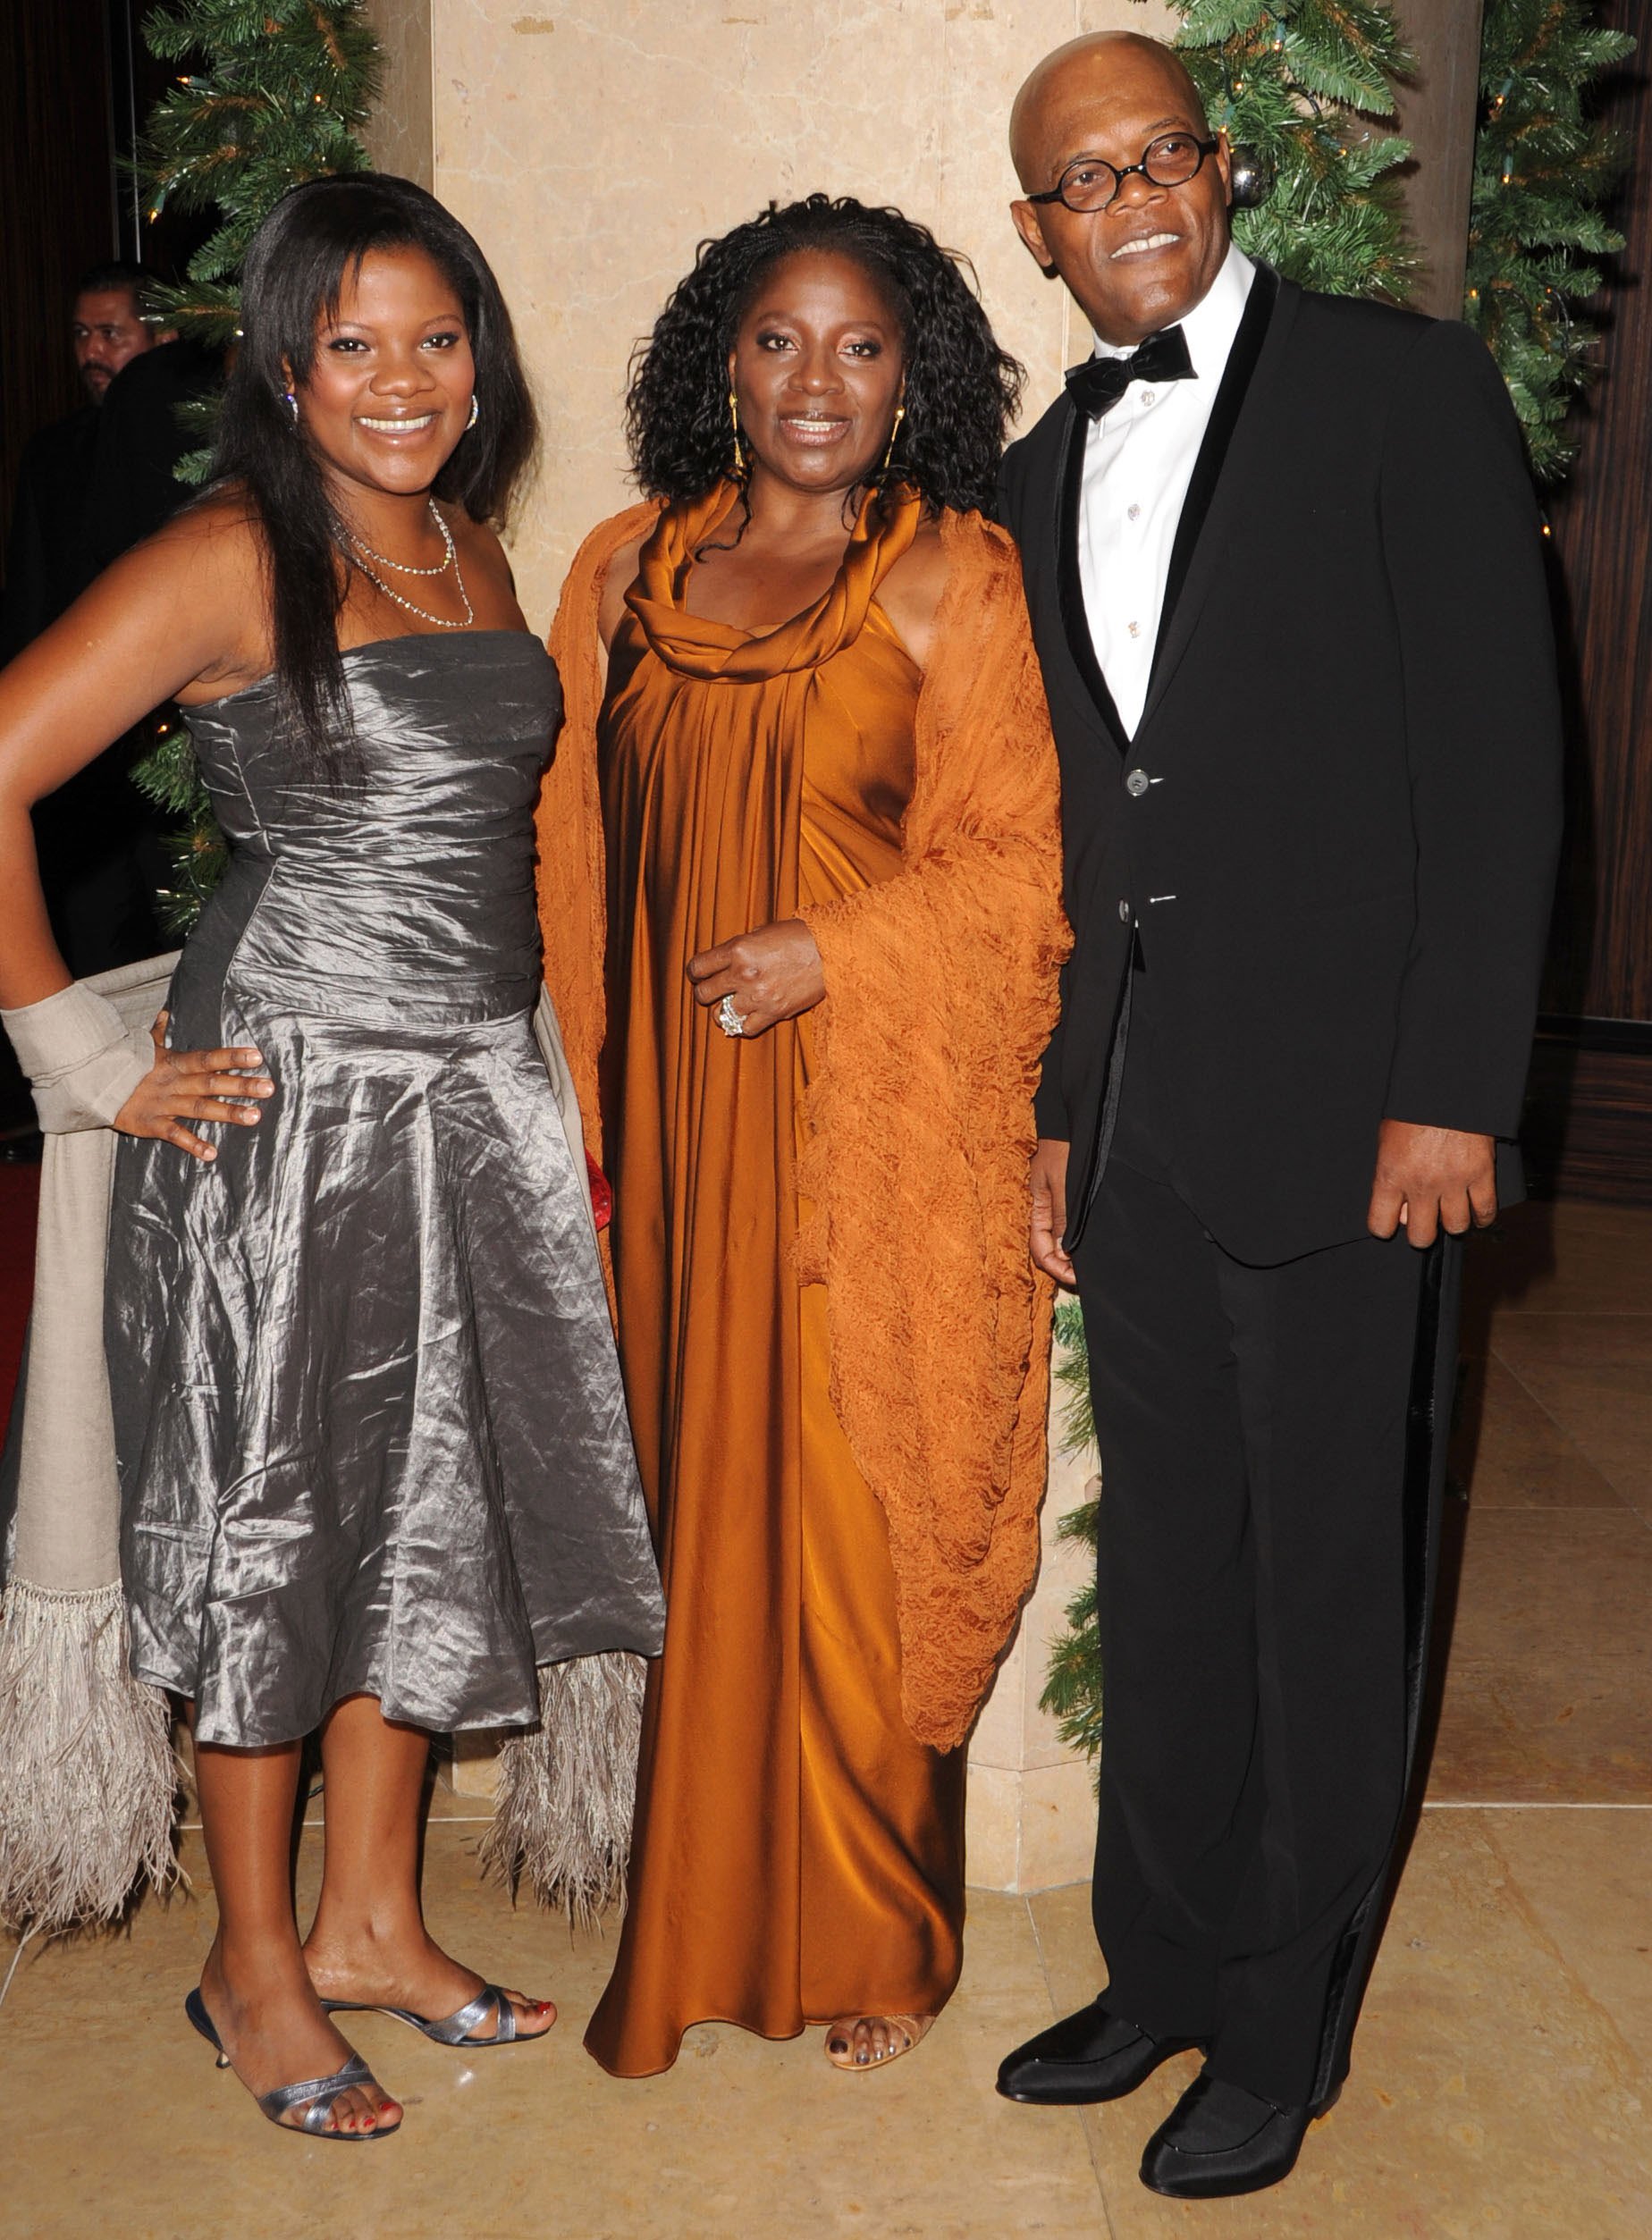 Actor Samuel L. Jackson and wife LaTanya Richardson and daughter Zoe Jackson arrives at the 23rd Annual American Cinematheque Awards on December 1, 2008 in Beverly Hills, California. | Source: Getty Images